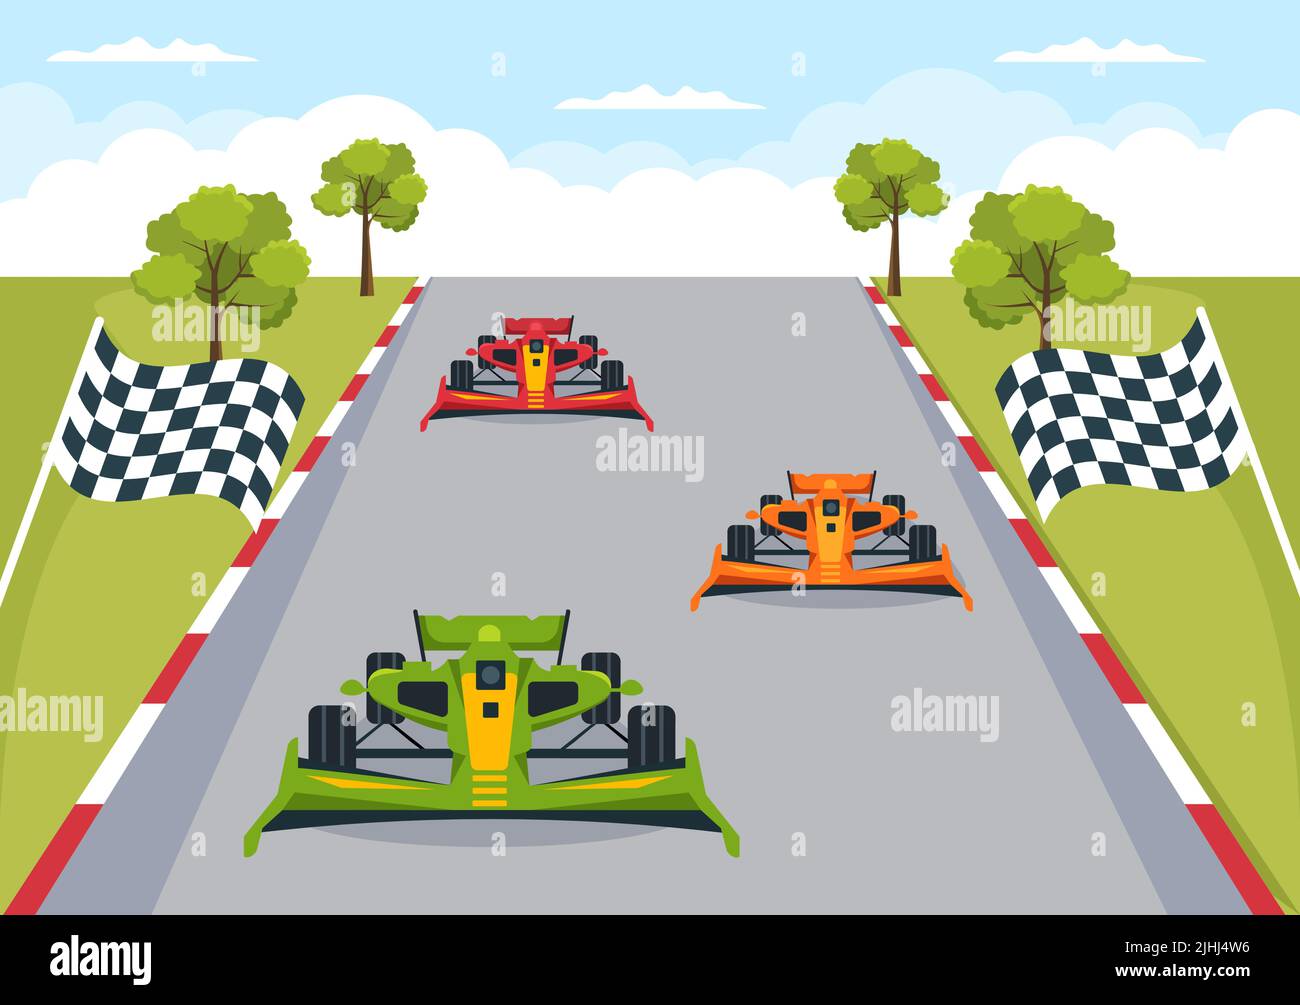 Formula Racing Sport Car Reach on Race Circuit the Finish Line Cartoon Illustration to Win the Championship in Flat Style Design Stock Vector